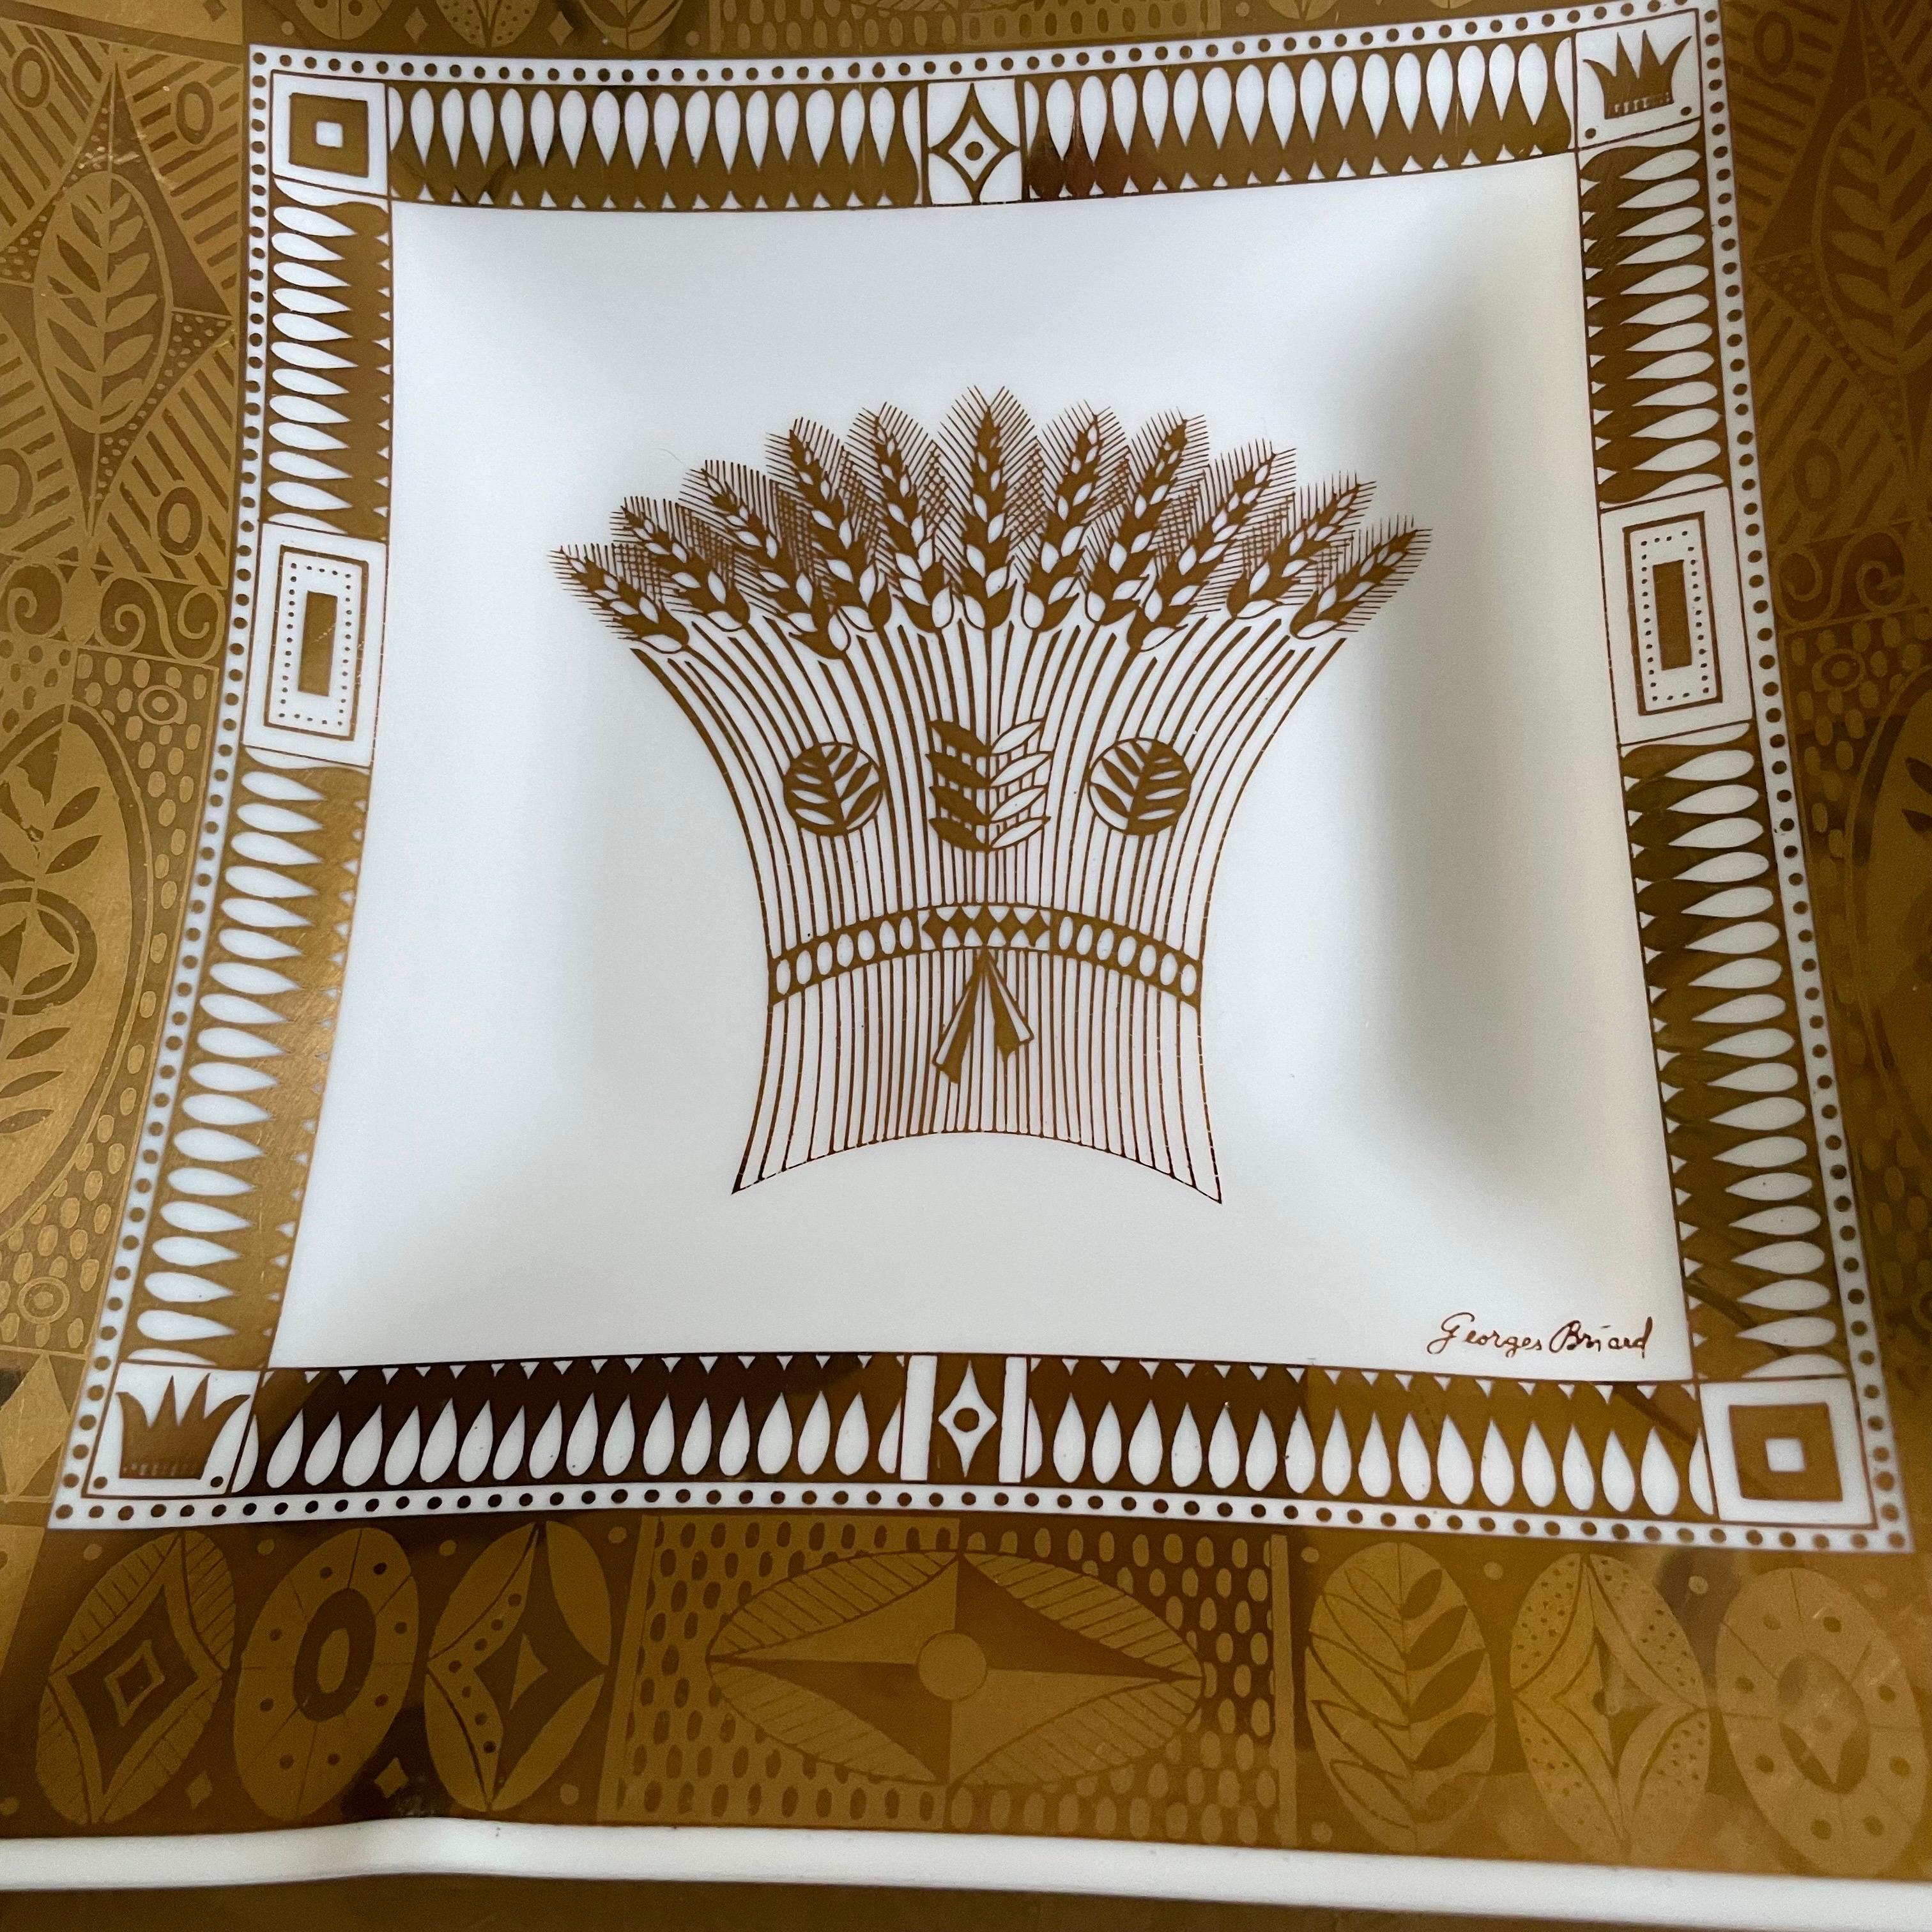 Nice pair of Georges Briard milk glass serving trays with gold leaf pattern.